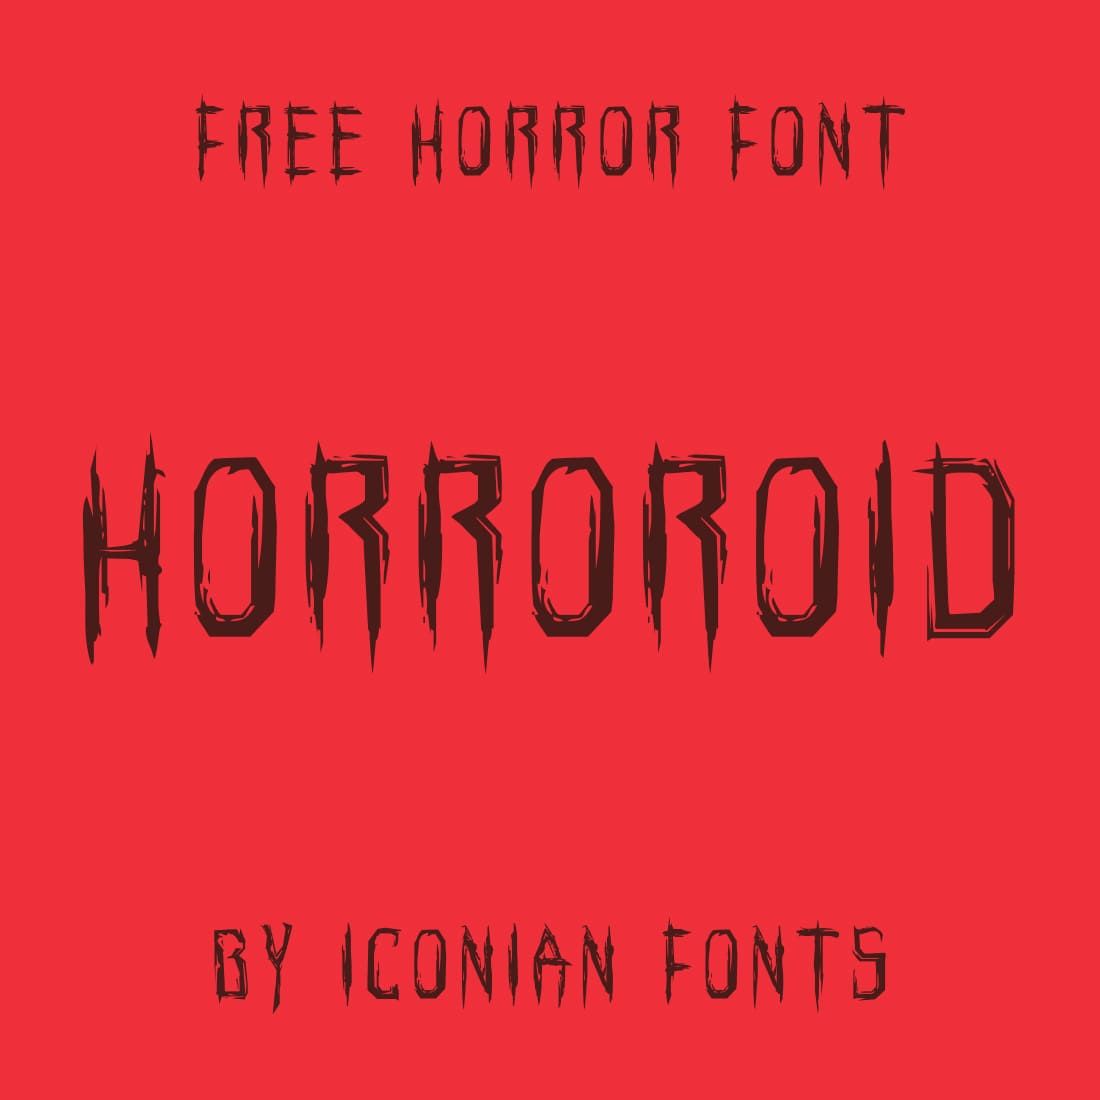 Horror font on the red background.